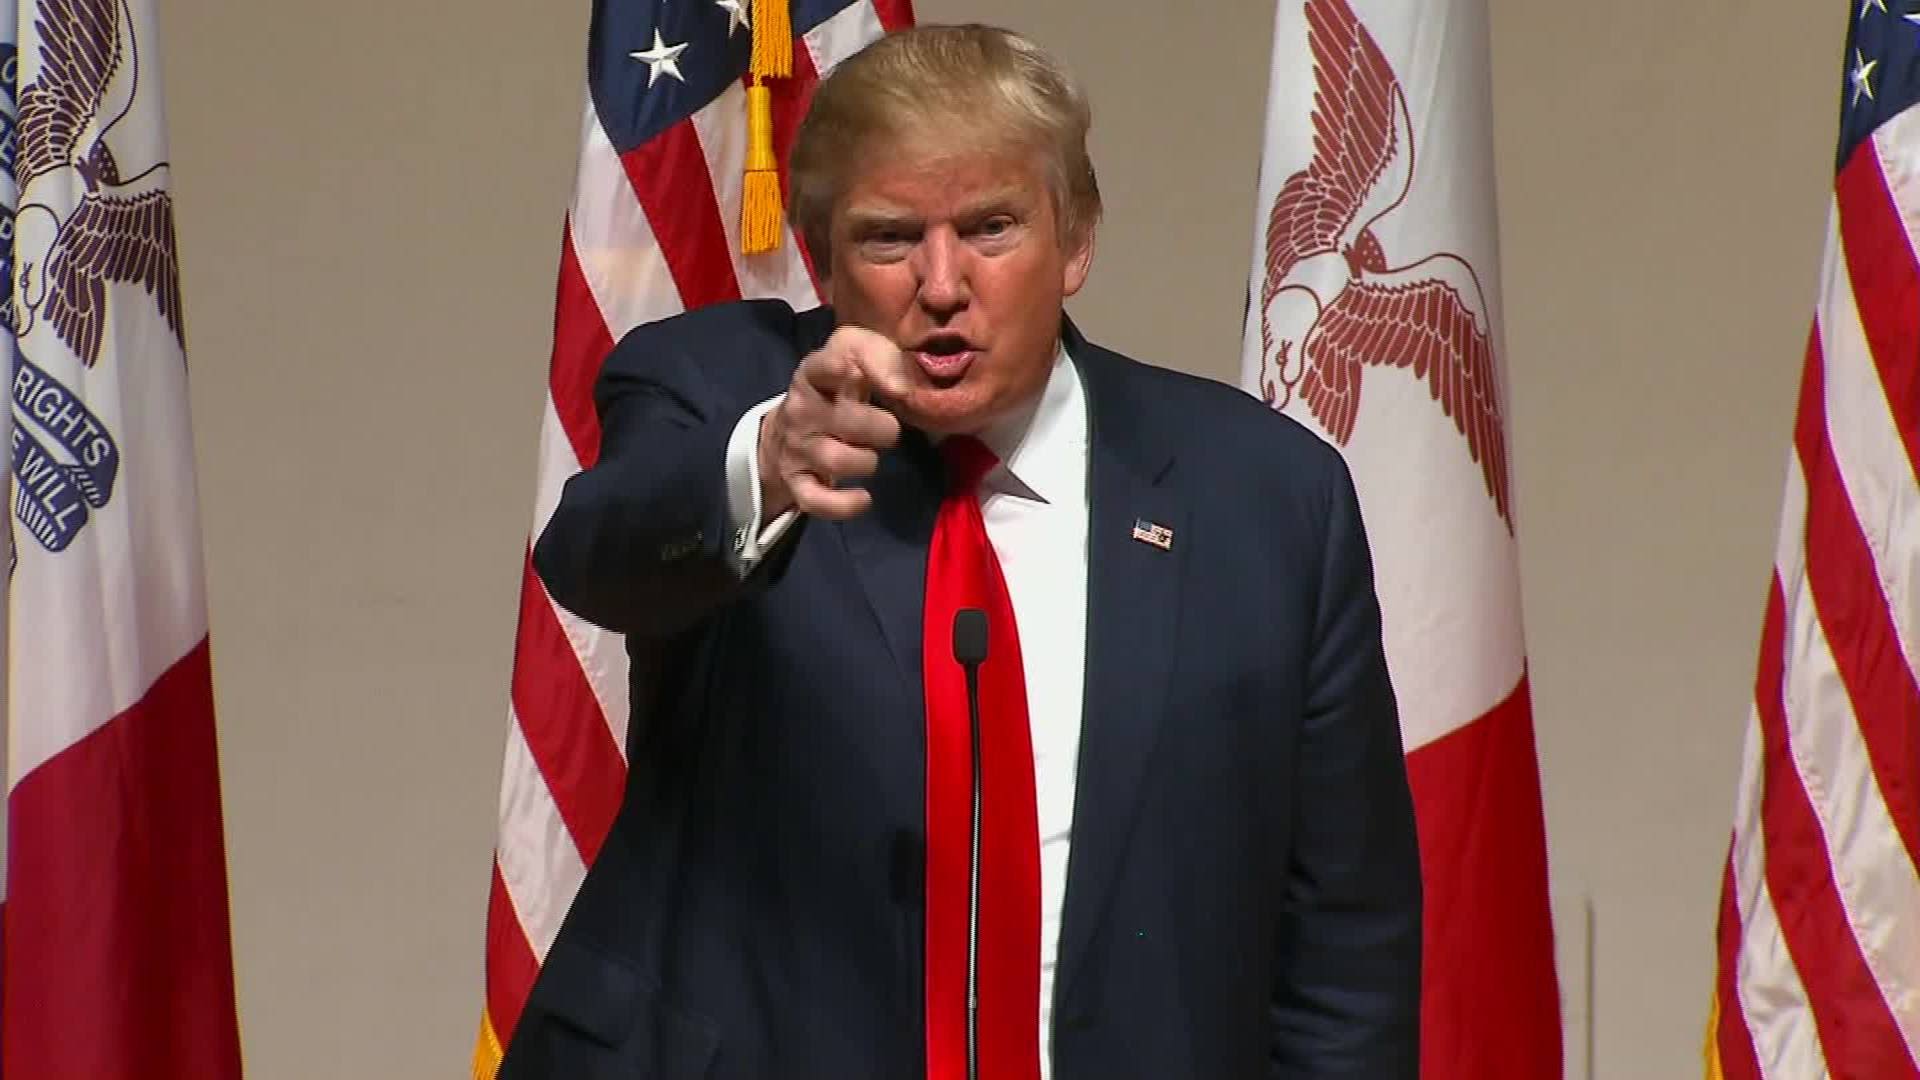 Donald Trump pointing at the crowd Blank Meme Template